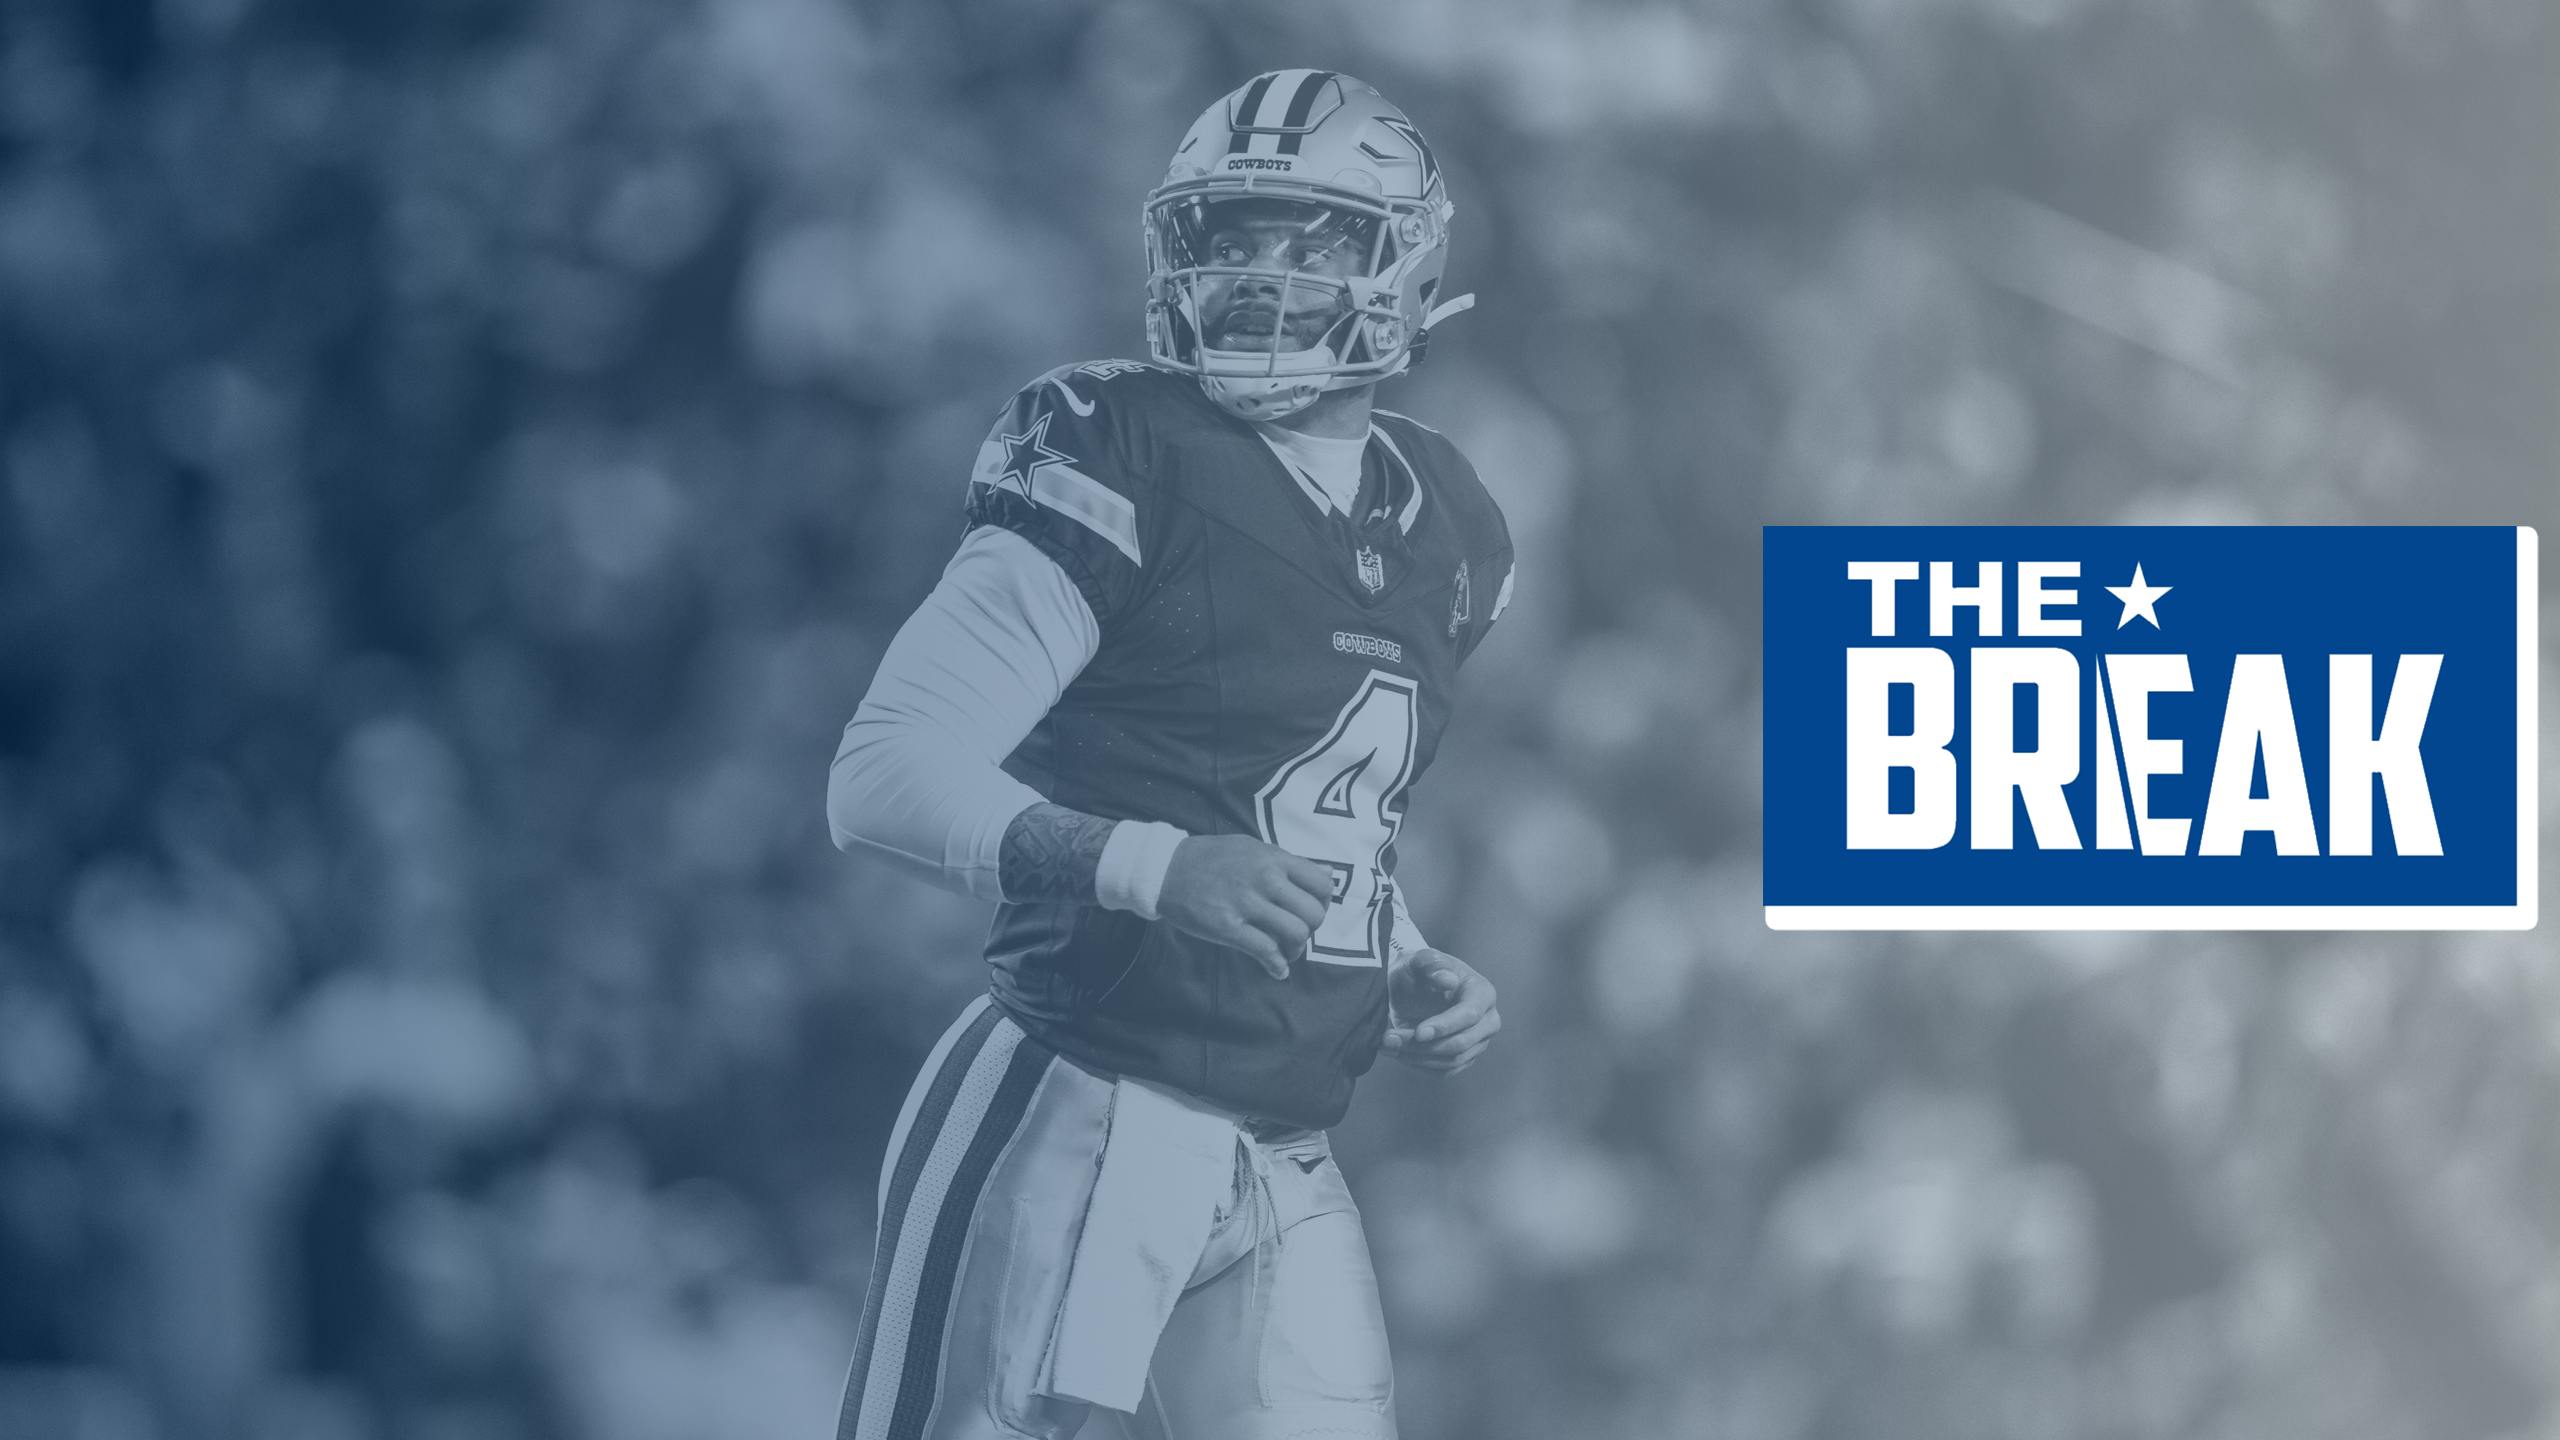 Cowboys Break: How Dak Can Grill The Cheese